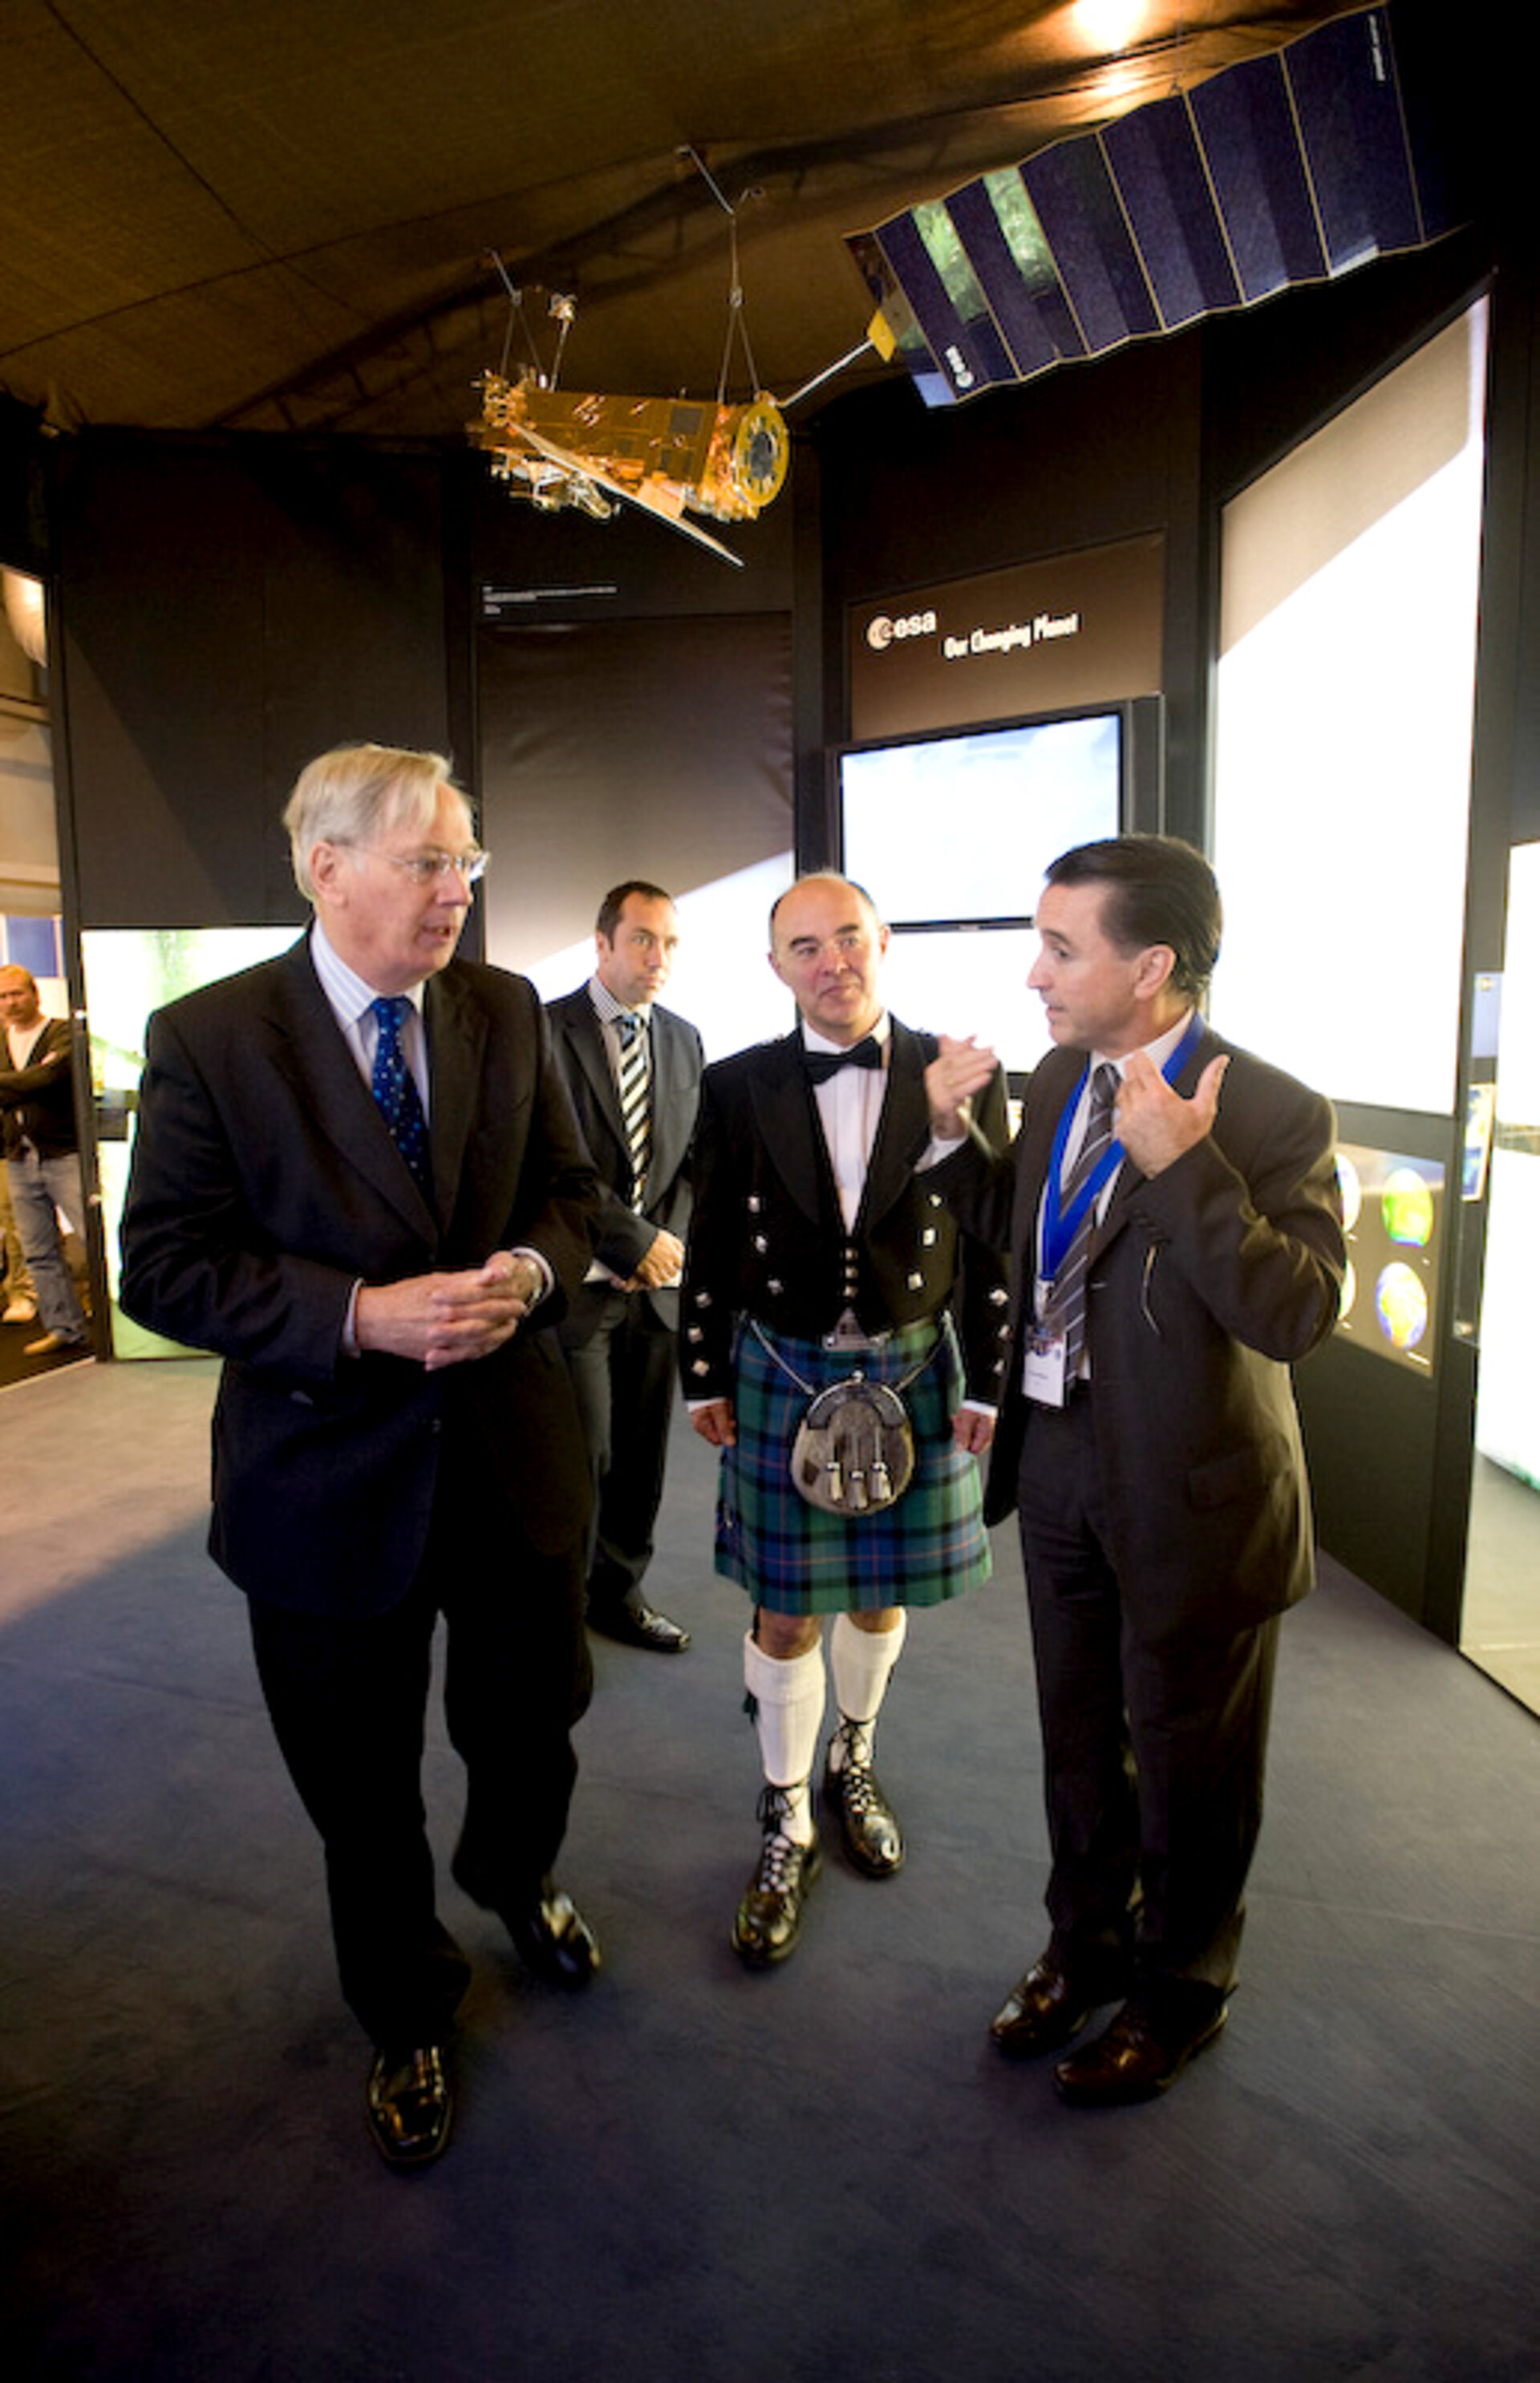 Inauguration with the Duke of Gloucester